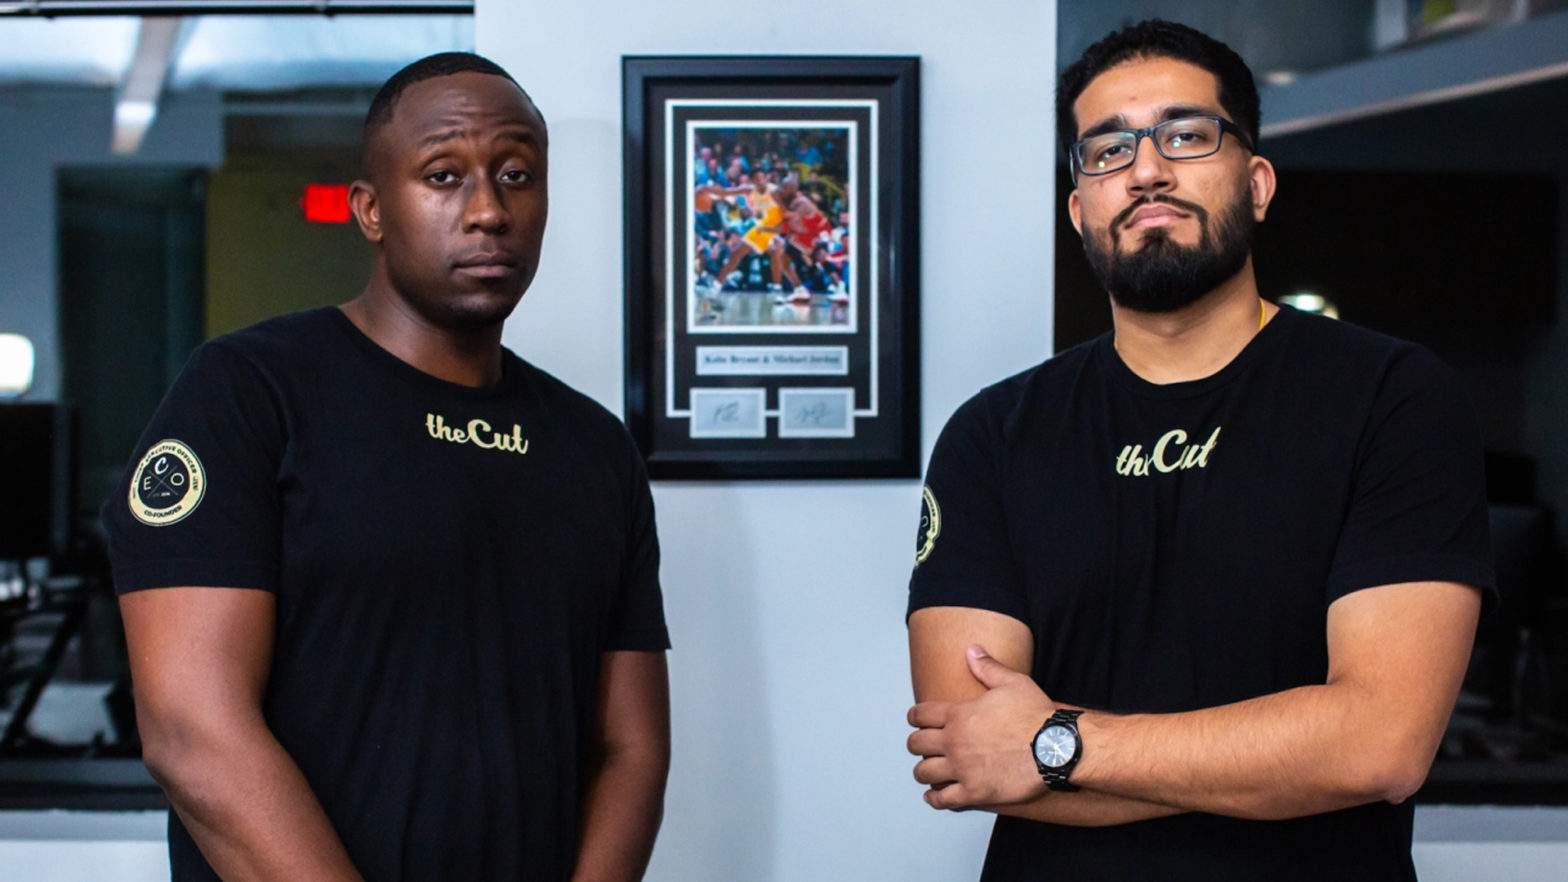 Tech Startup theCut Raises $4.5M Round To Transform The Booming Barbershop Industry